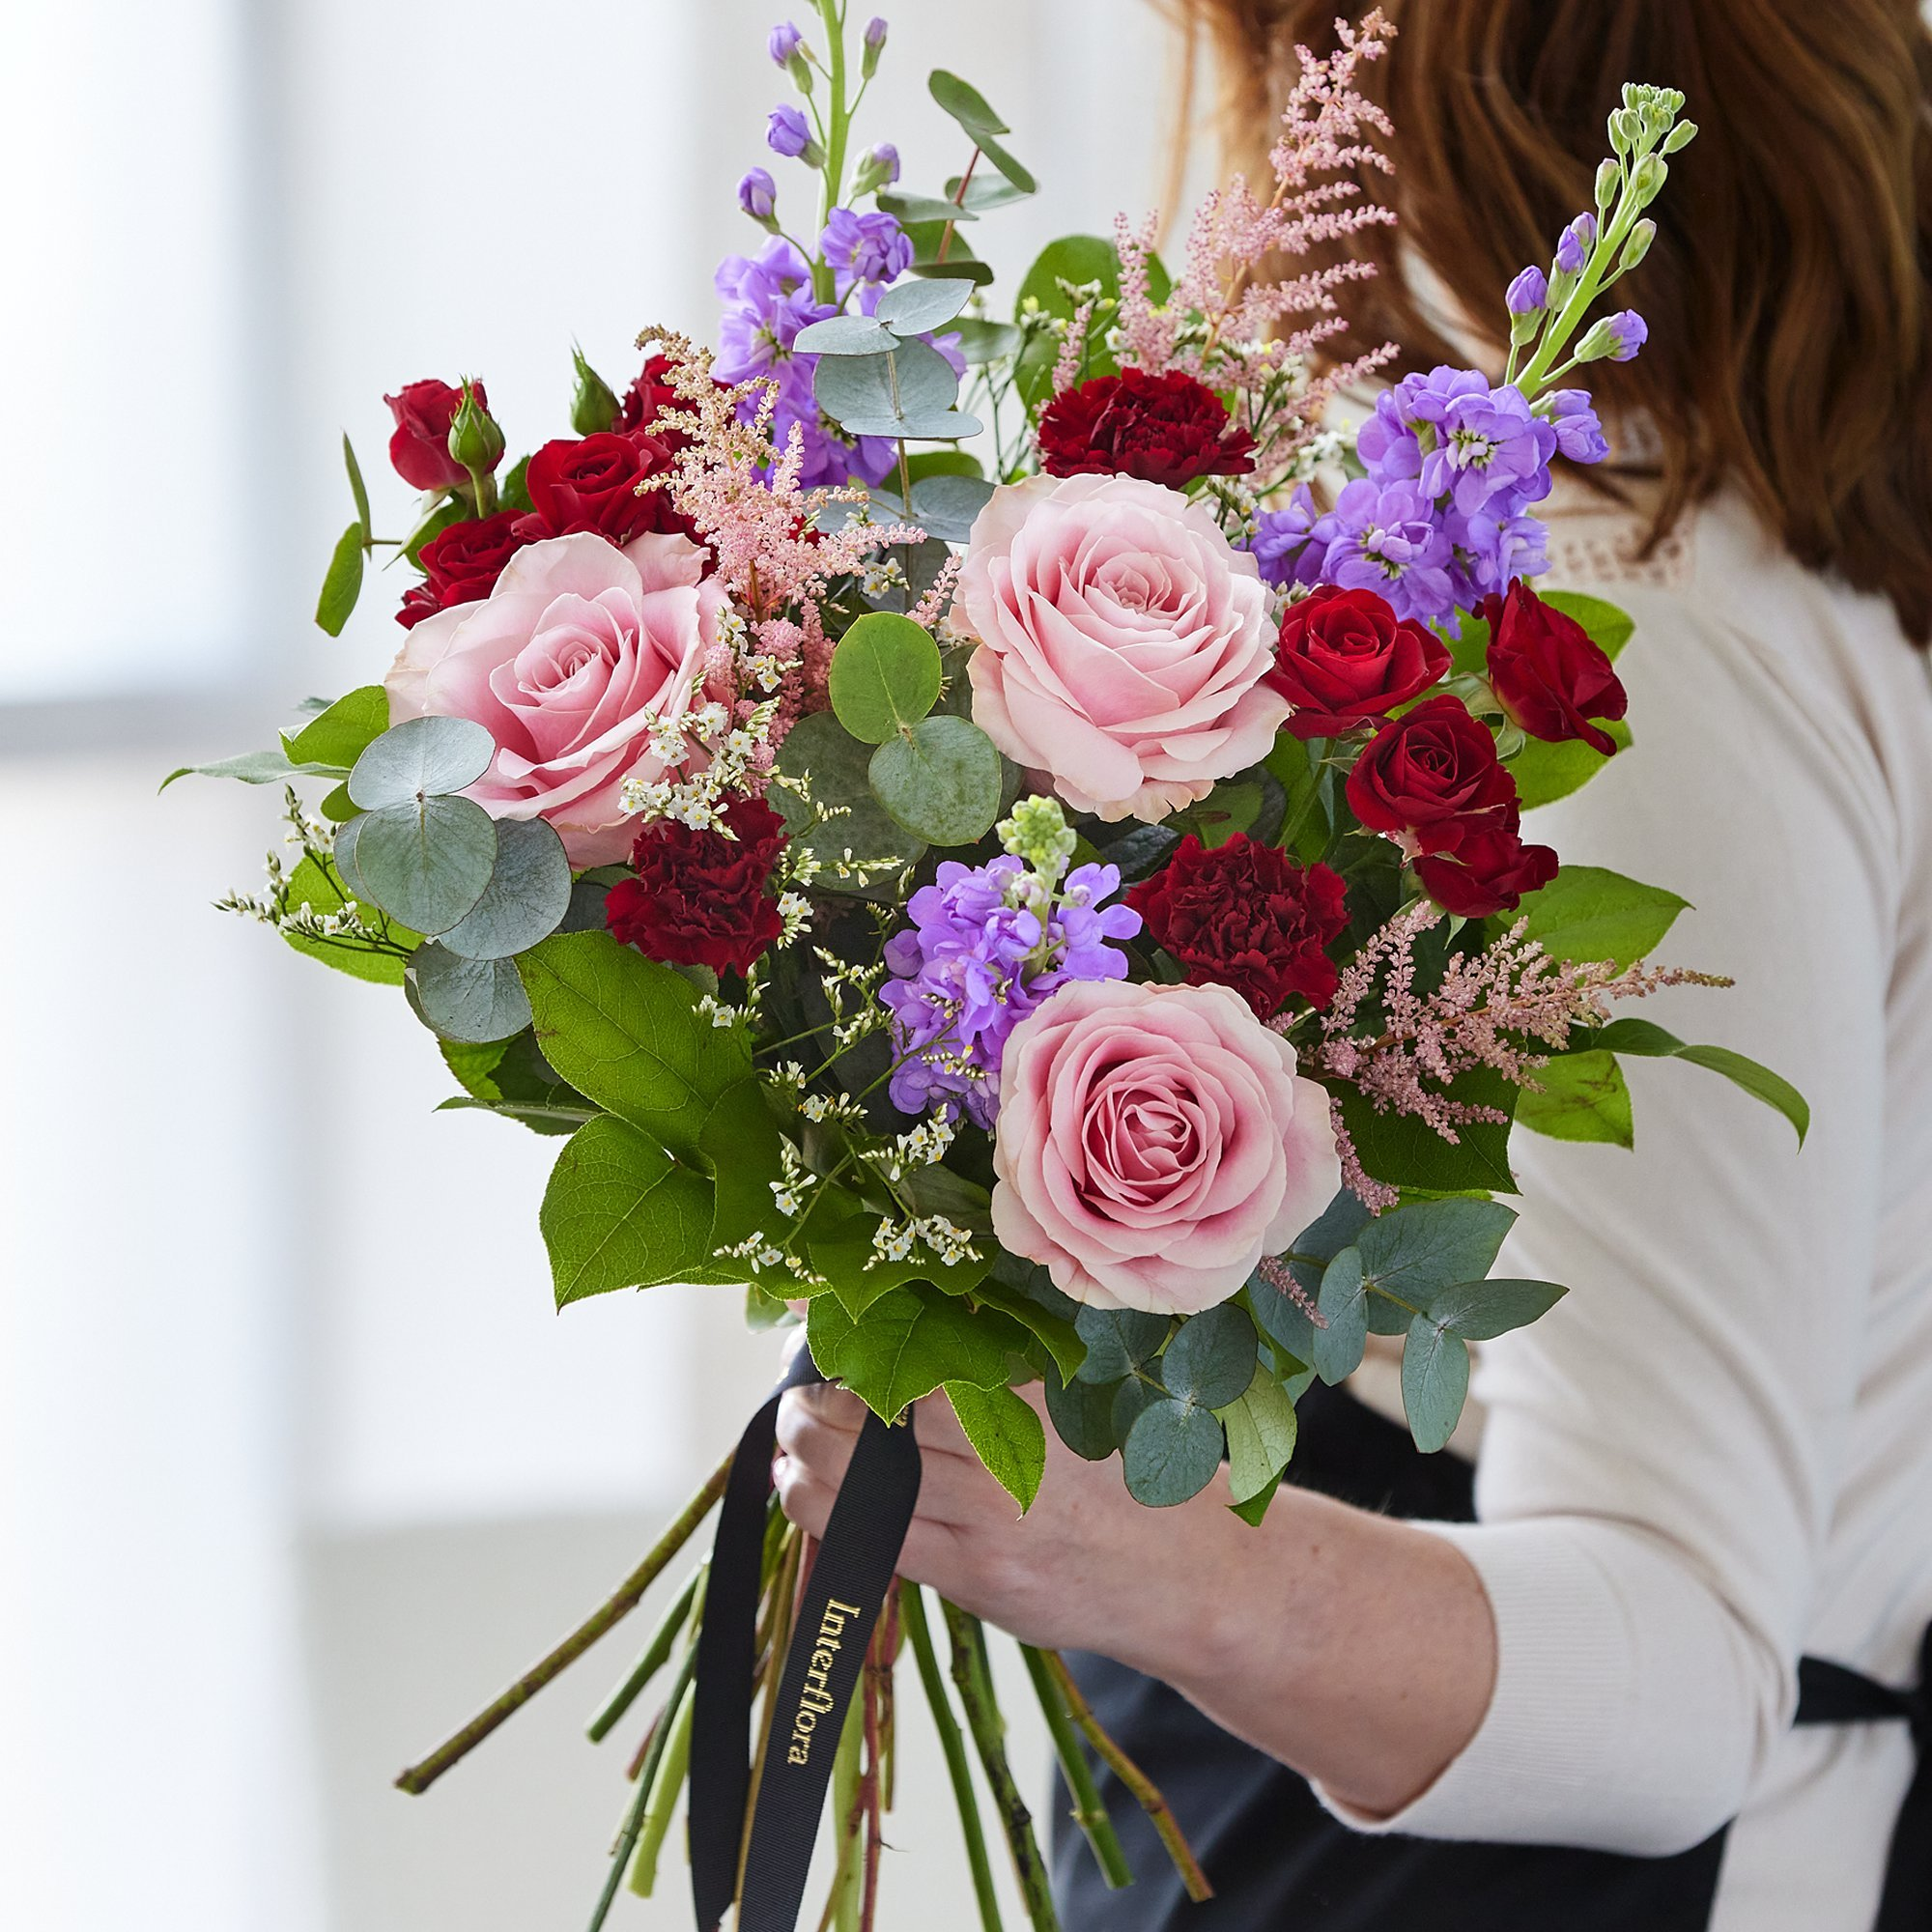 Hand-tied bouquet made with the finest flowers - Interflora | Interflora